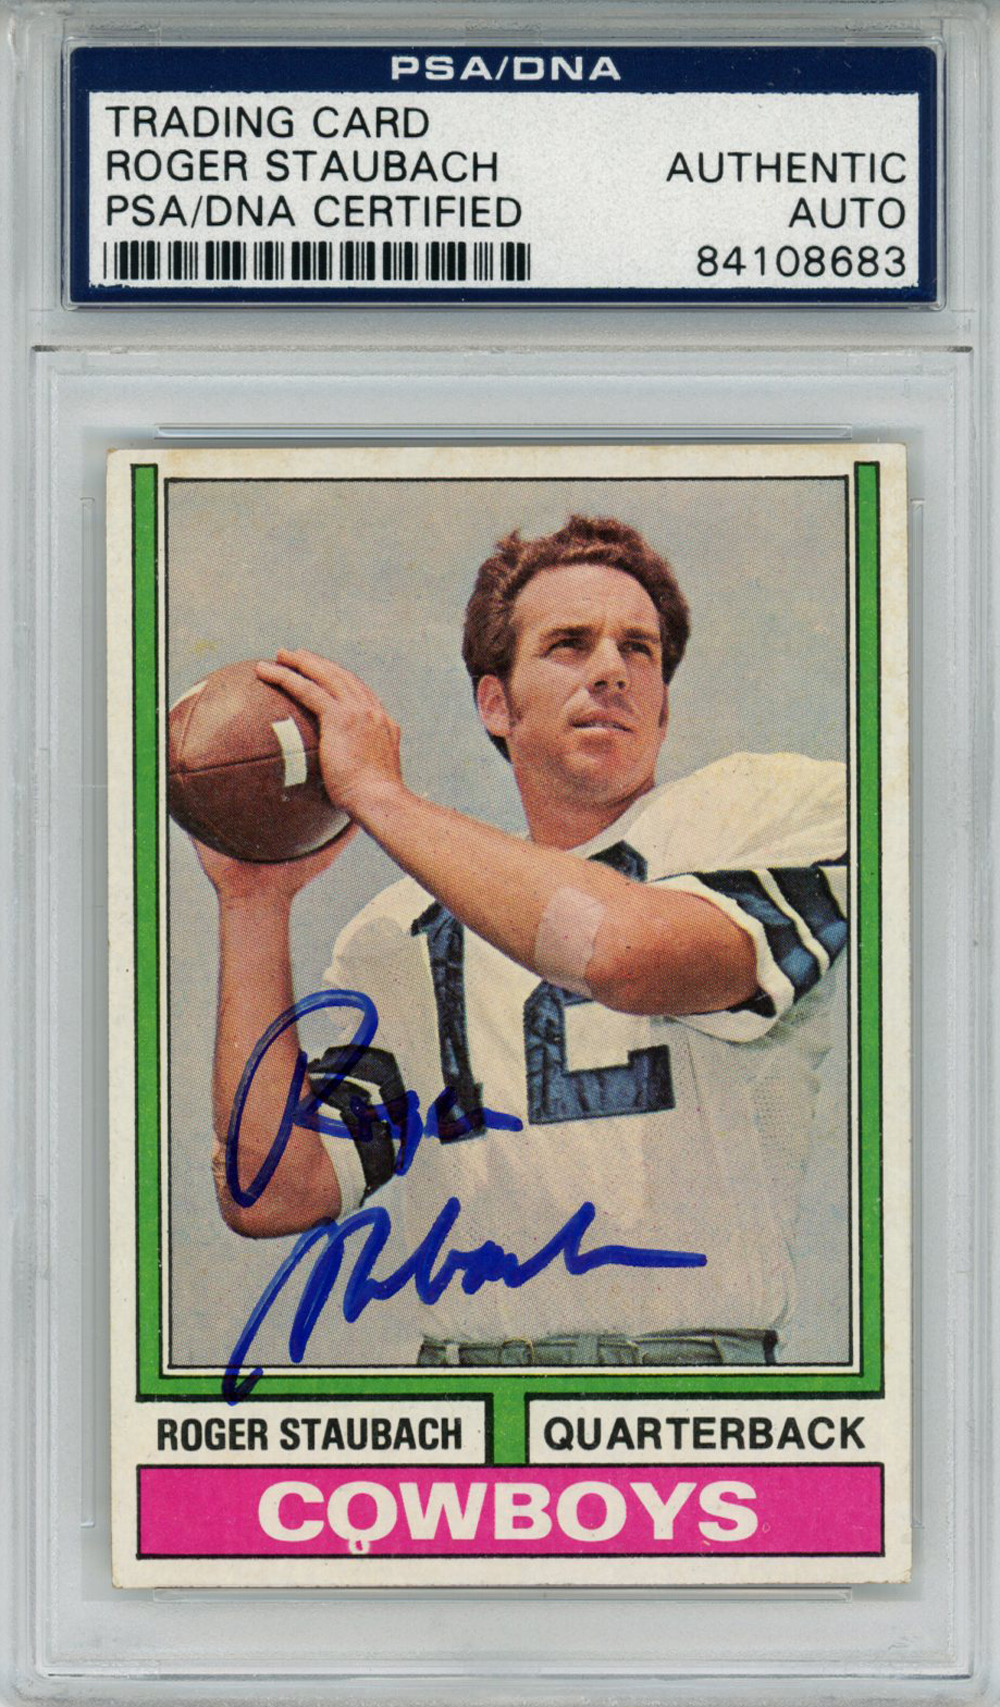 Roger Staubach Autographed 1974 Topps #500 Trading Card PSA Slab